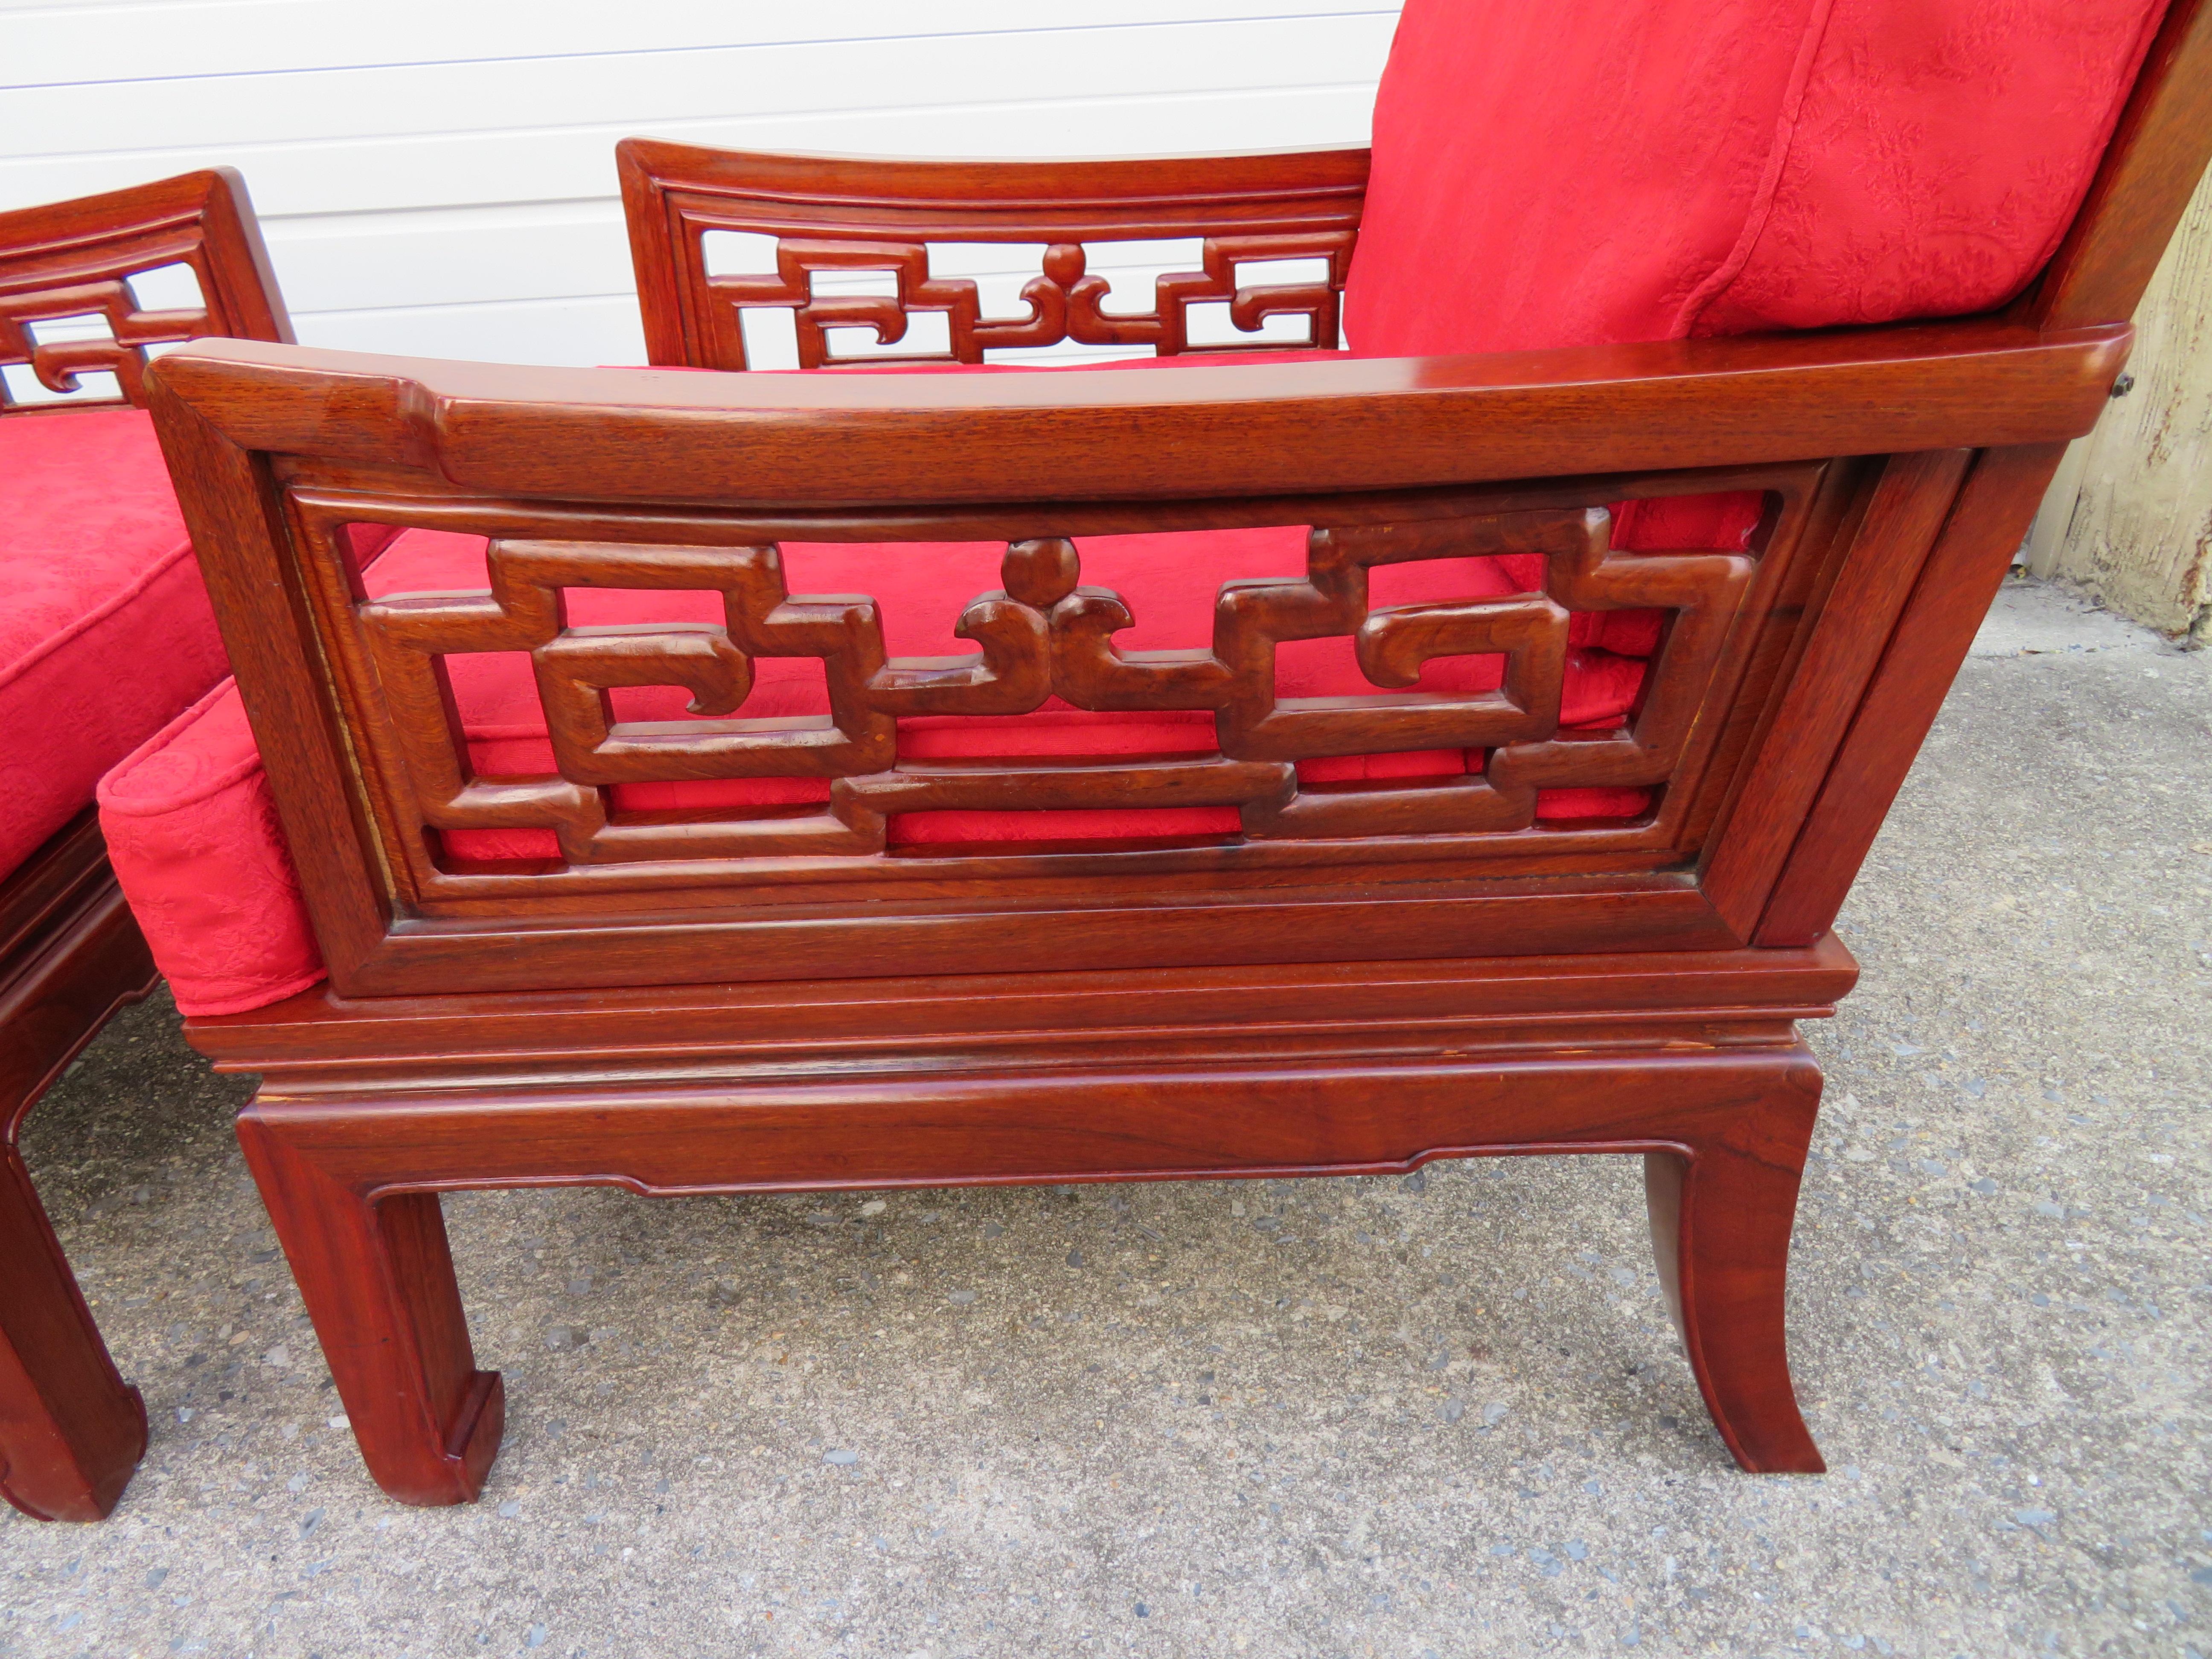 Exquisite Pair of Chinoiserie Ming Style Carved Rosewood Chairs Asian Modern In Good Condition For Sale In Pemberton, NJ